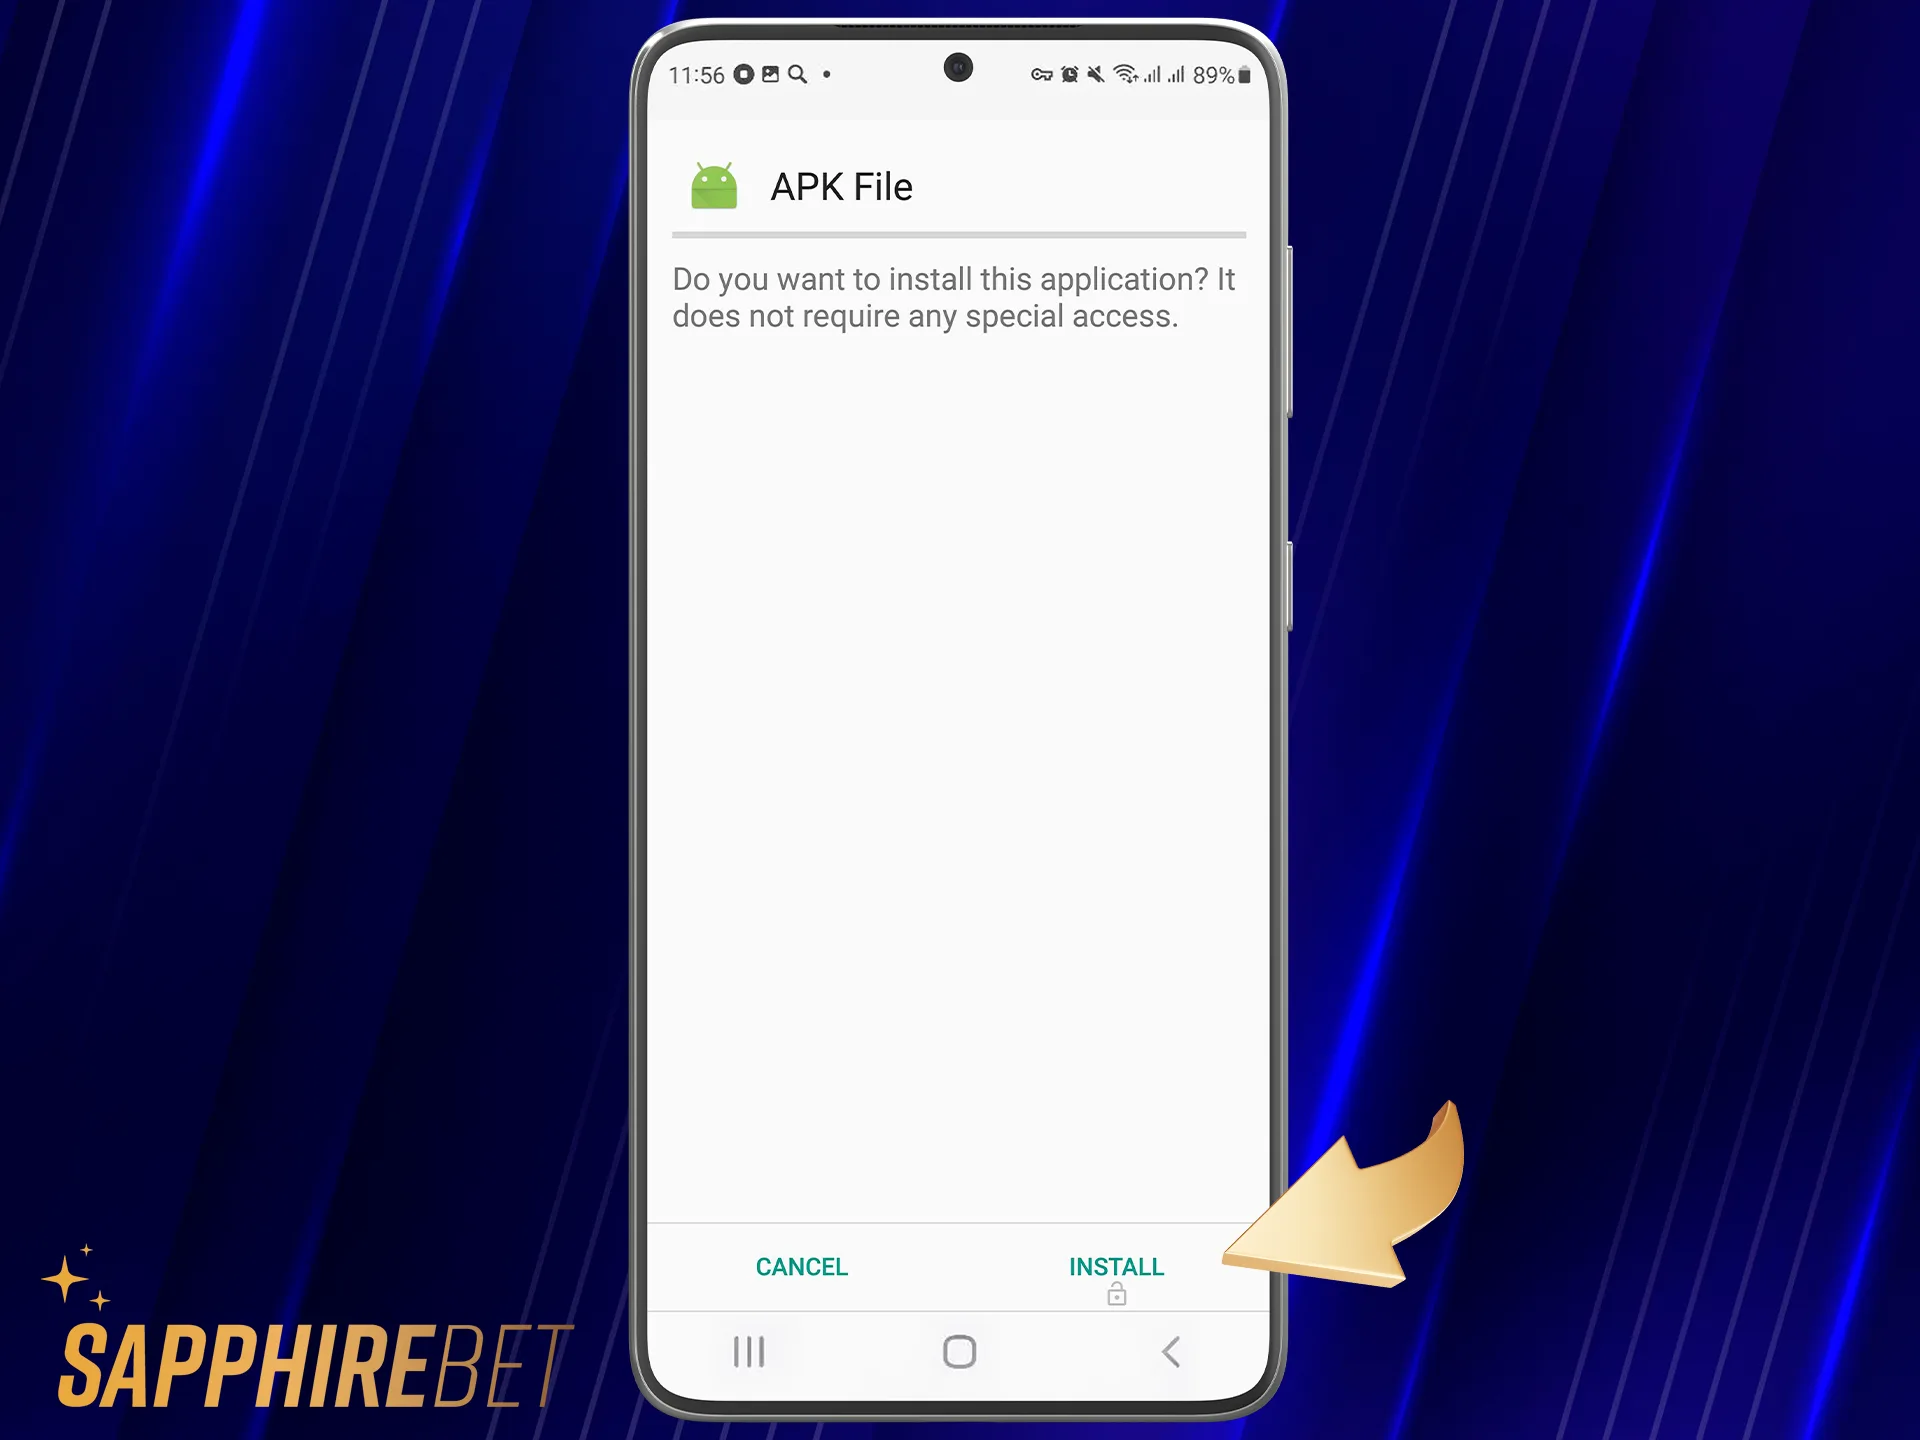 Start installing the SapphireBet APK file on your phone.